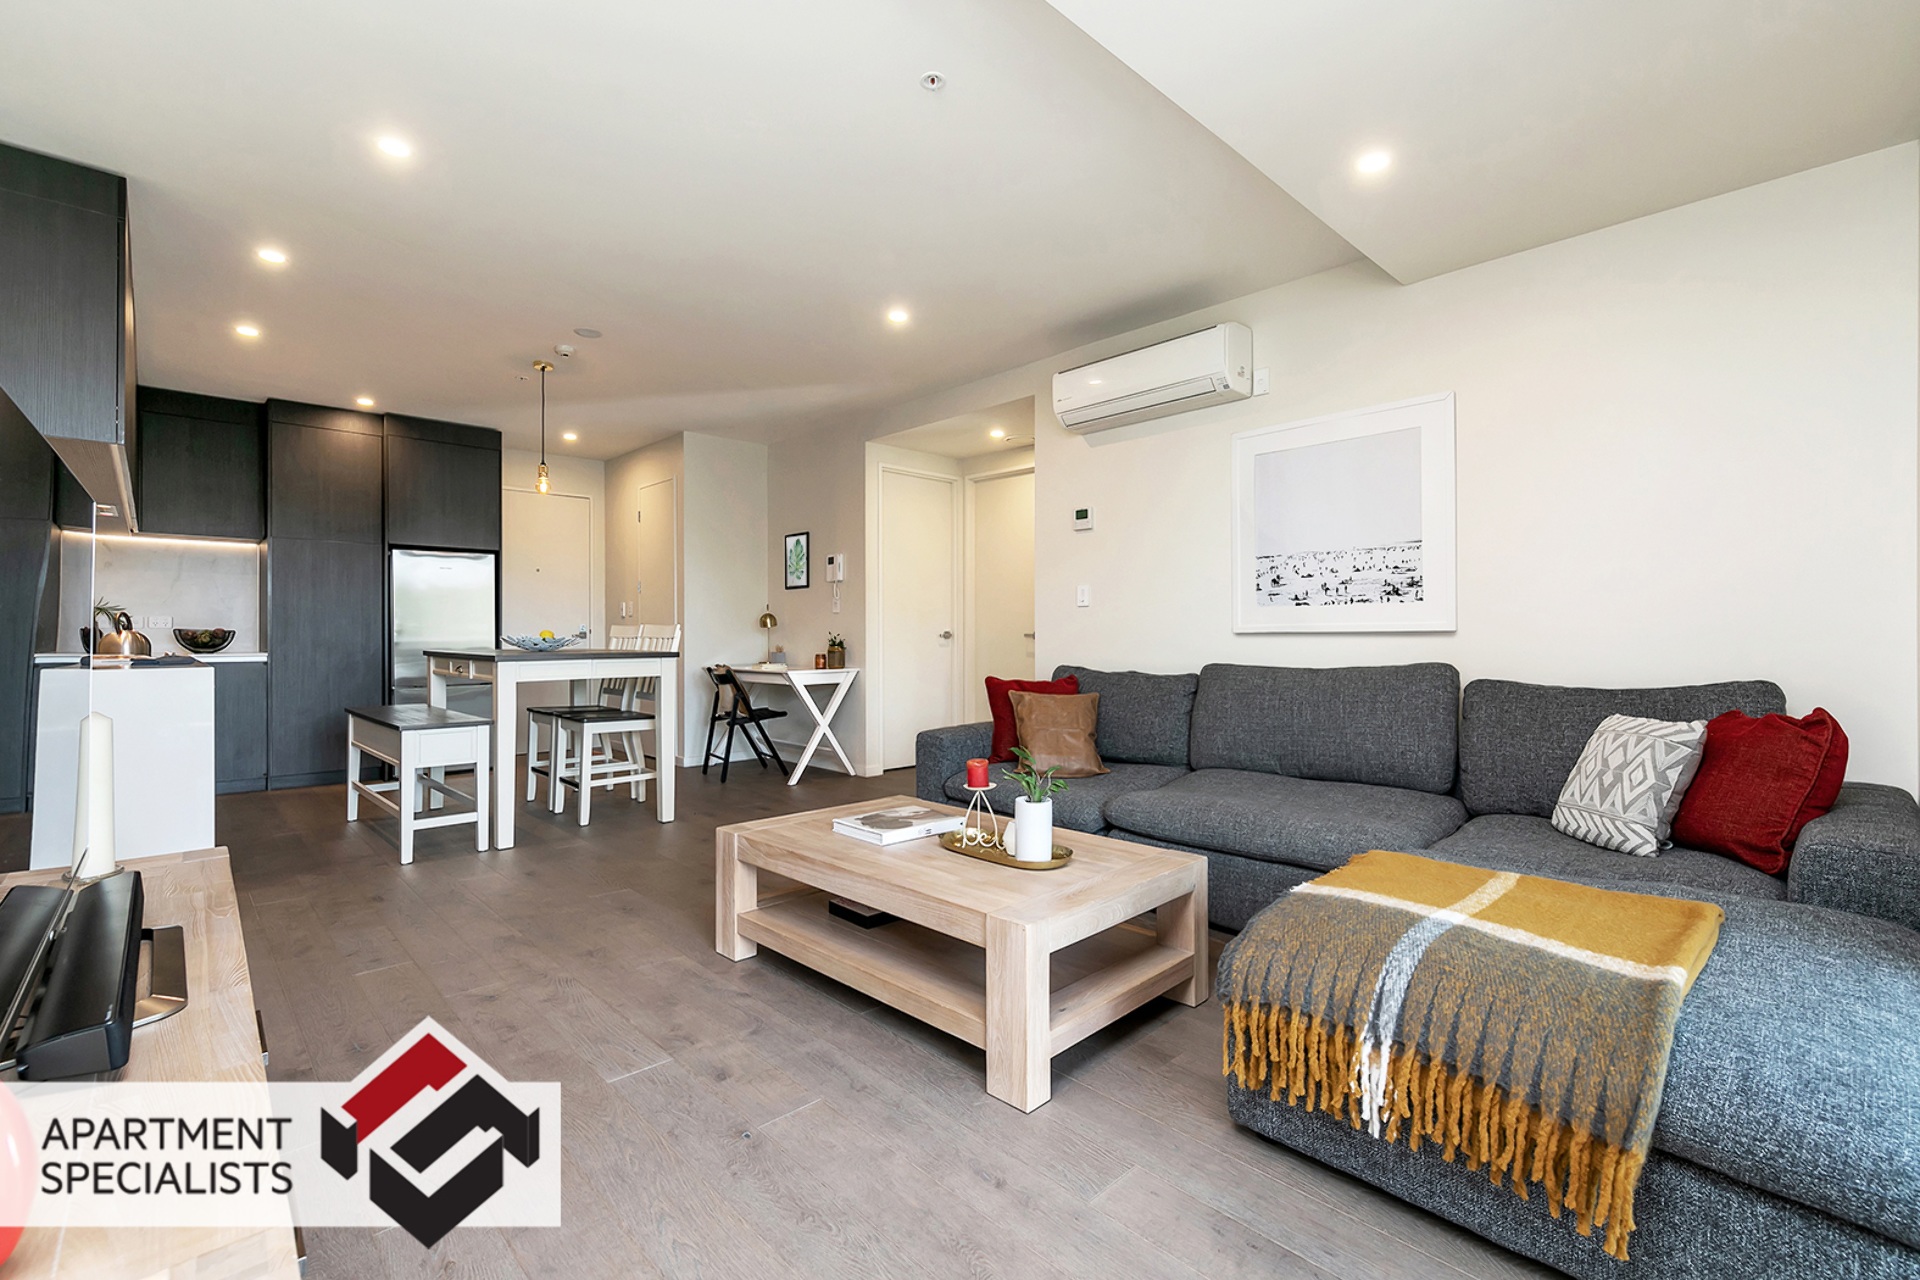 4 | 8 Central Road, Kingsland | Apartment Specialists